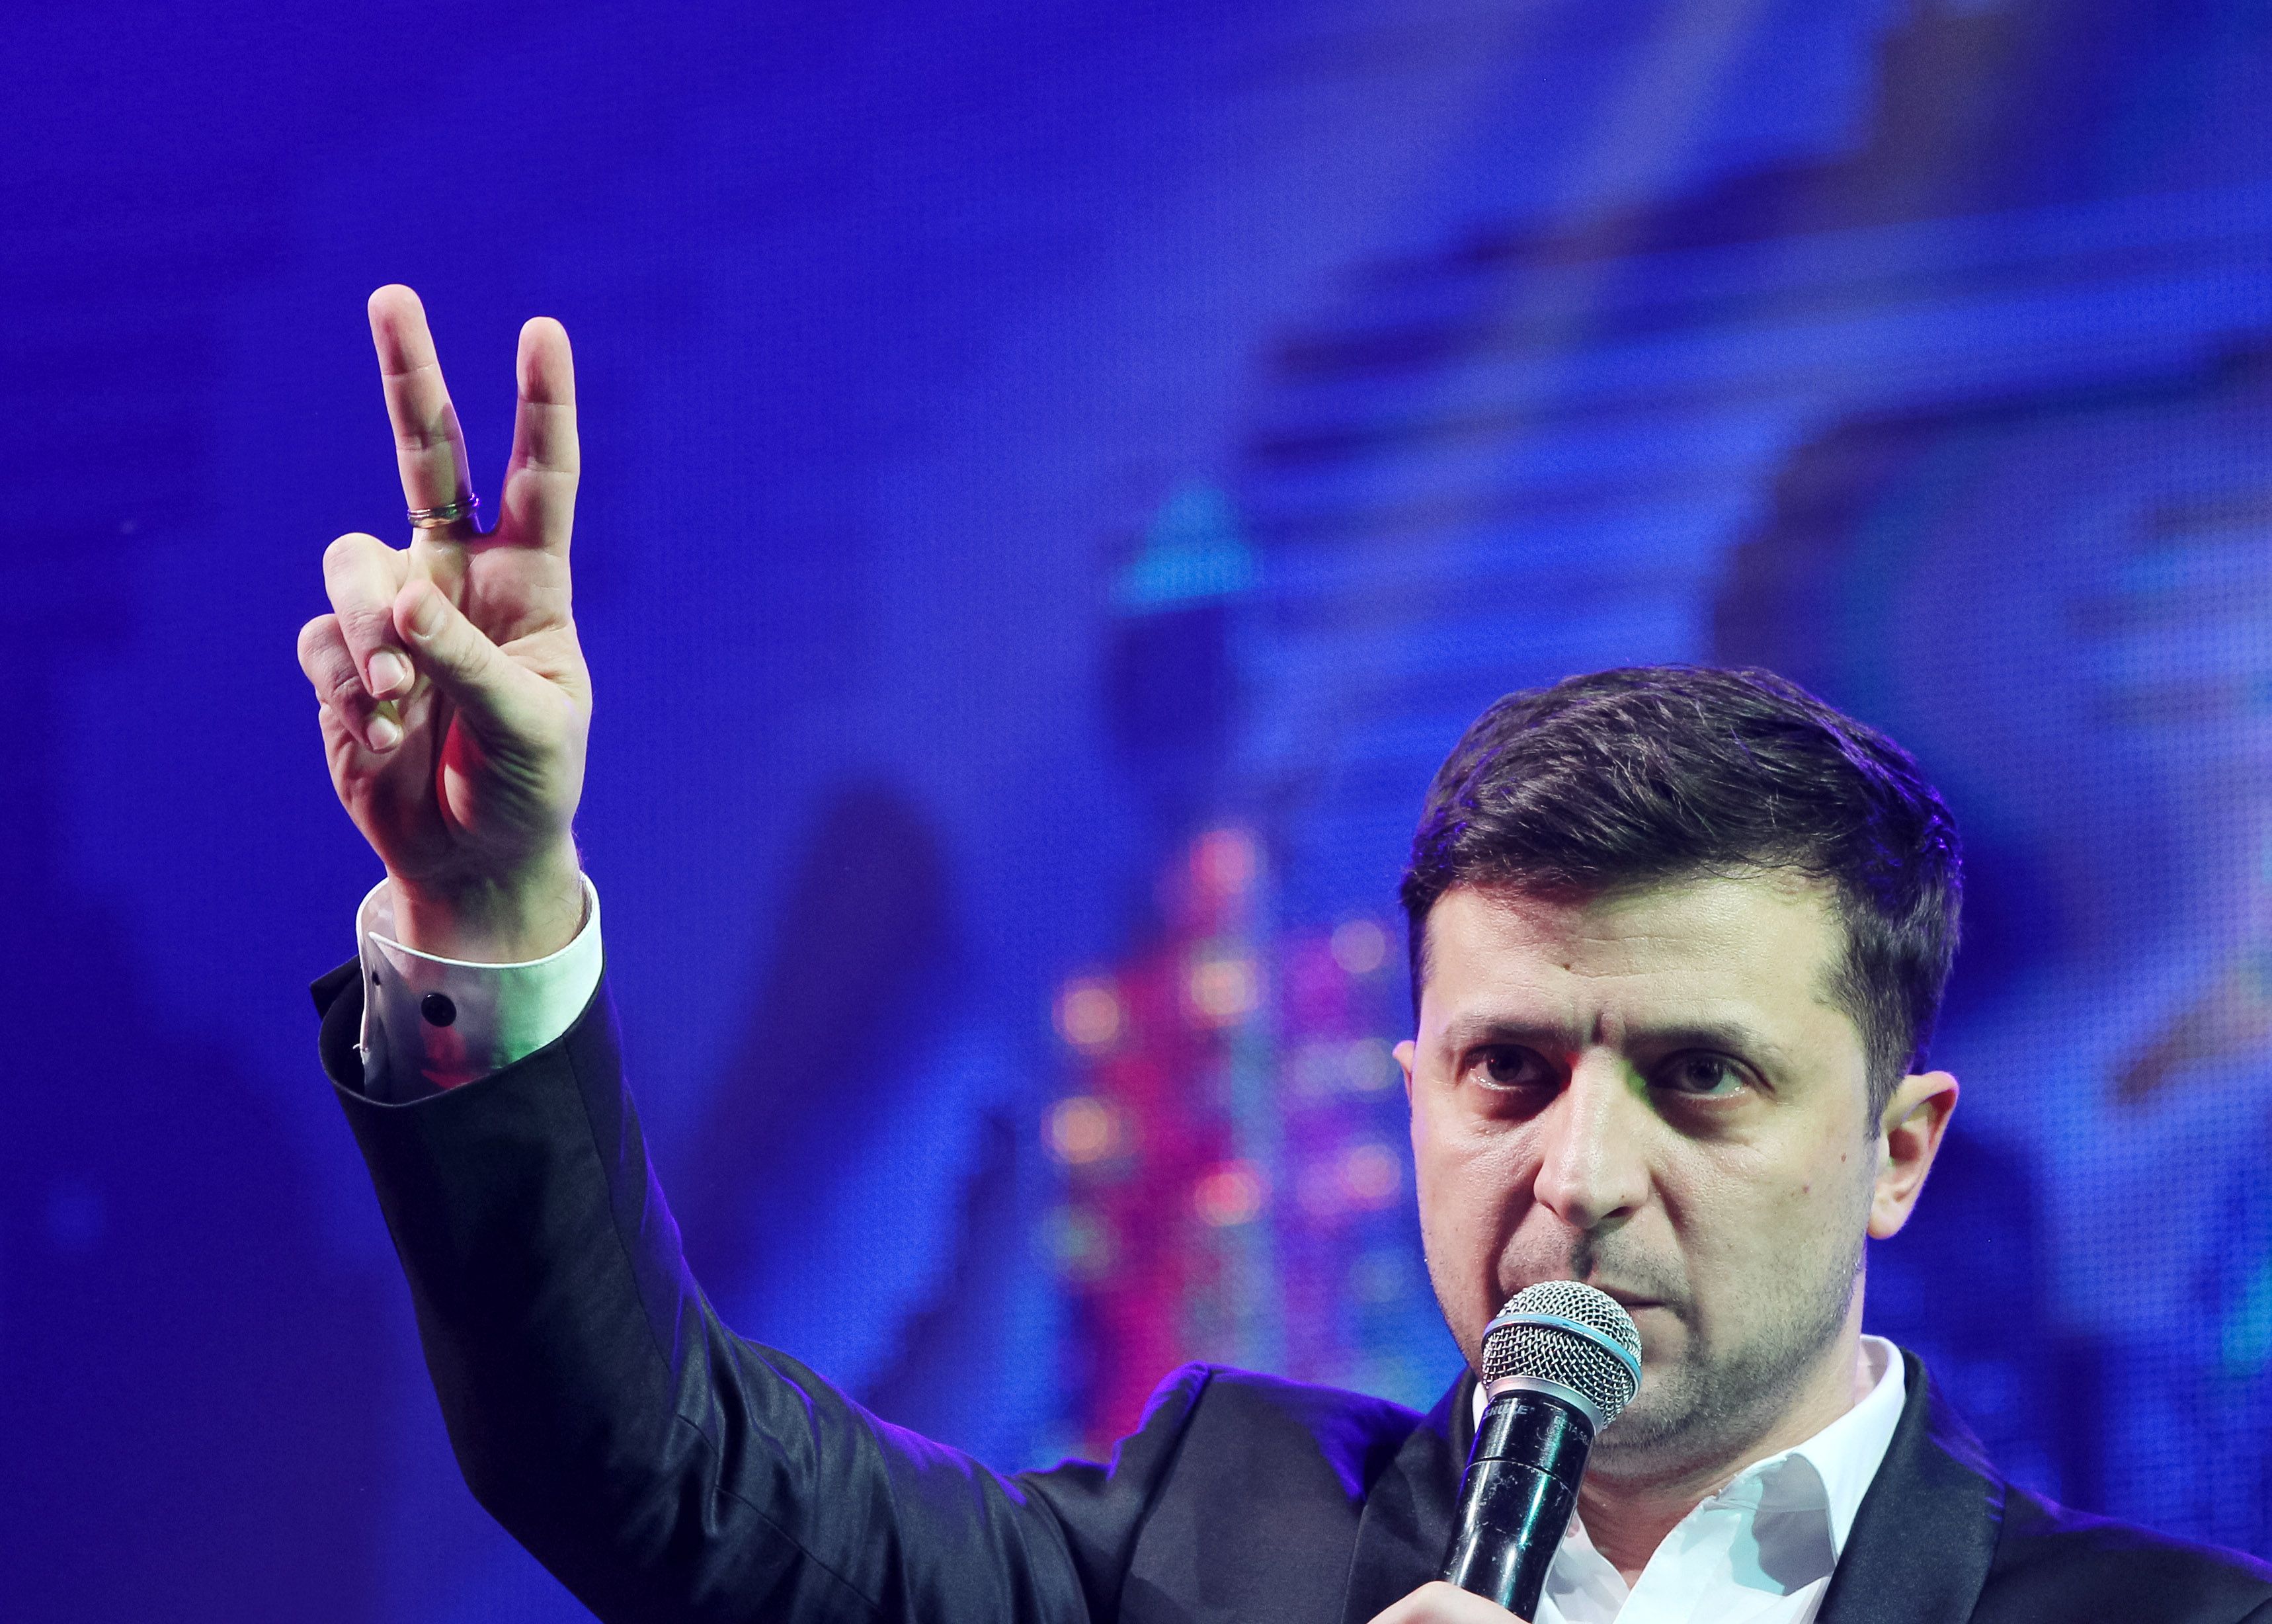 Ukrainian President-elect Volodymyr Zelenskiy shows victory sign during a comedy show at a concert hall in Brovary. Ukraine, 2019. Image by Shutterstock. 